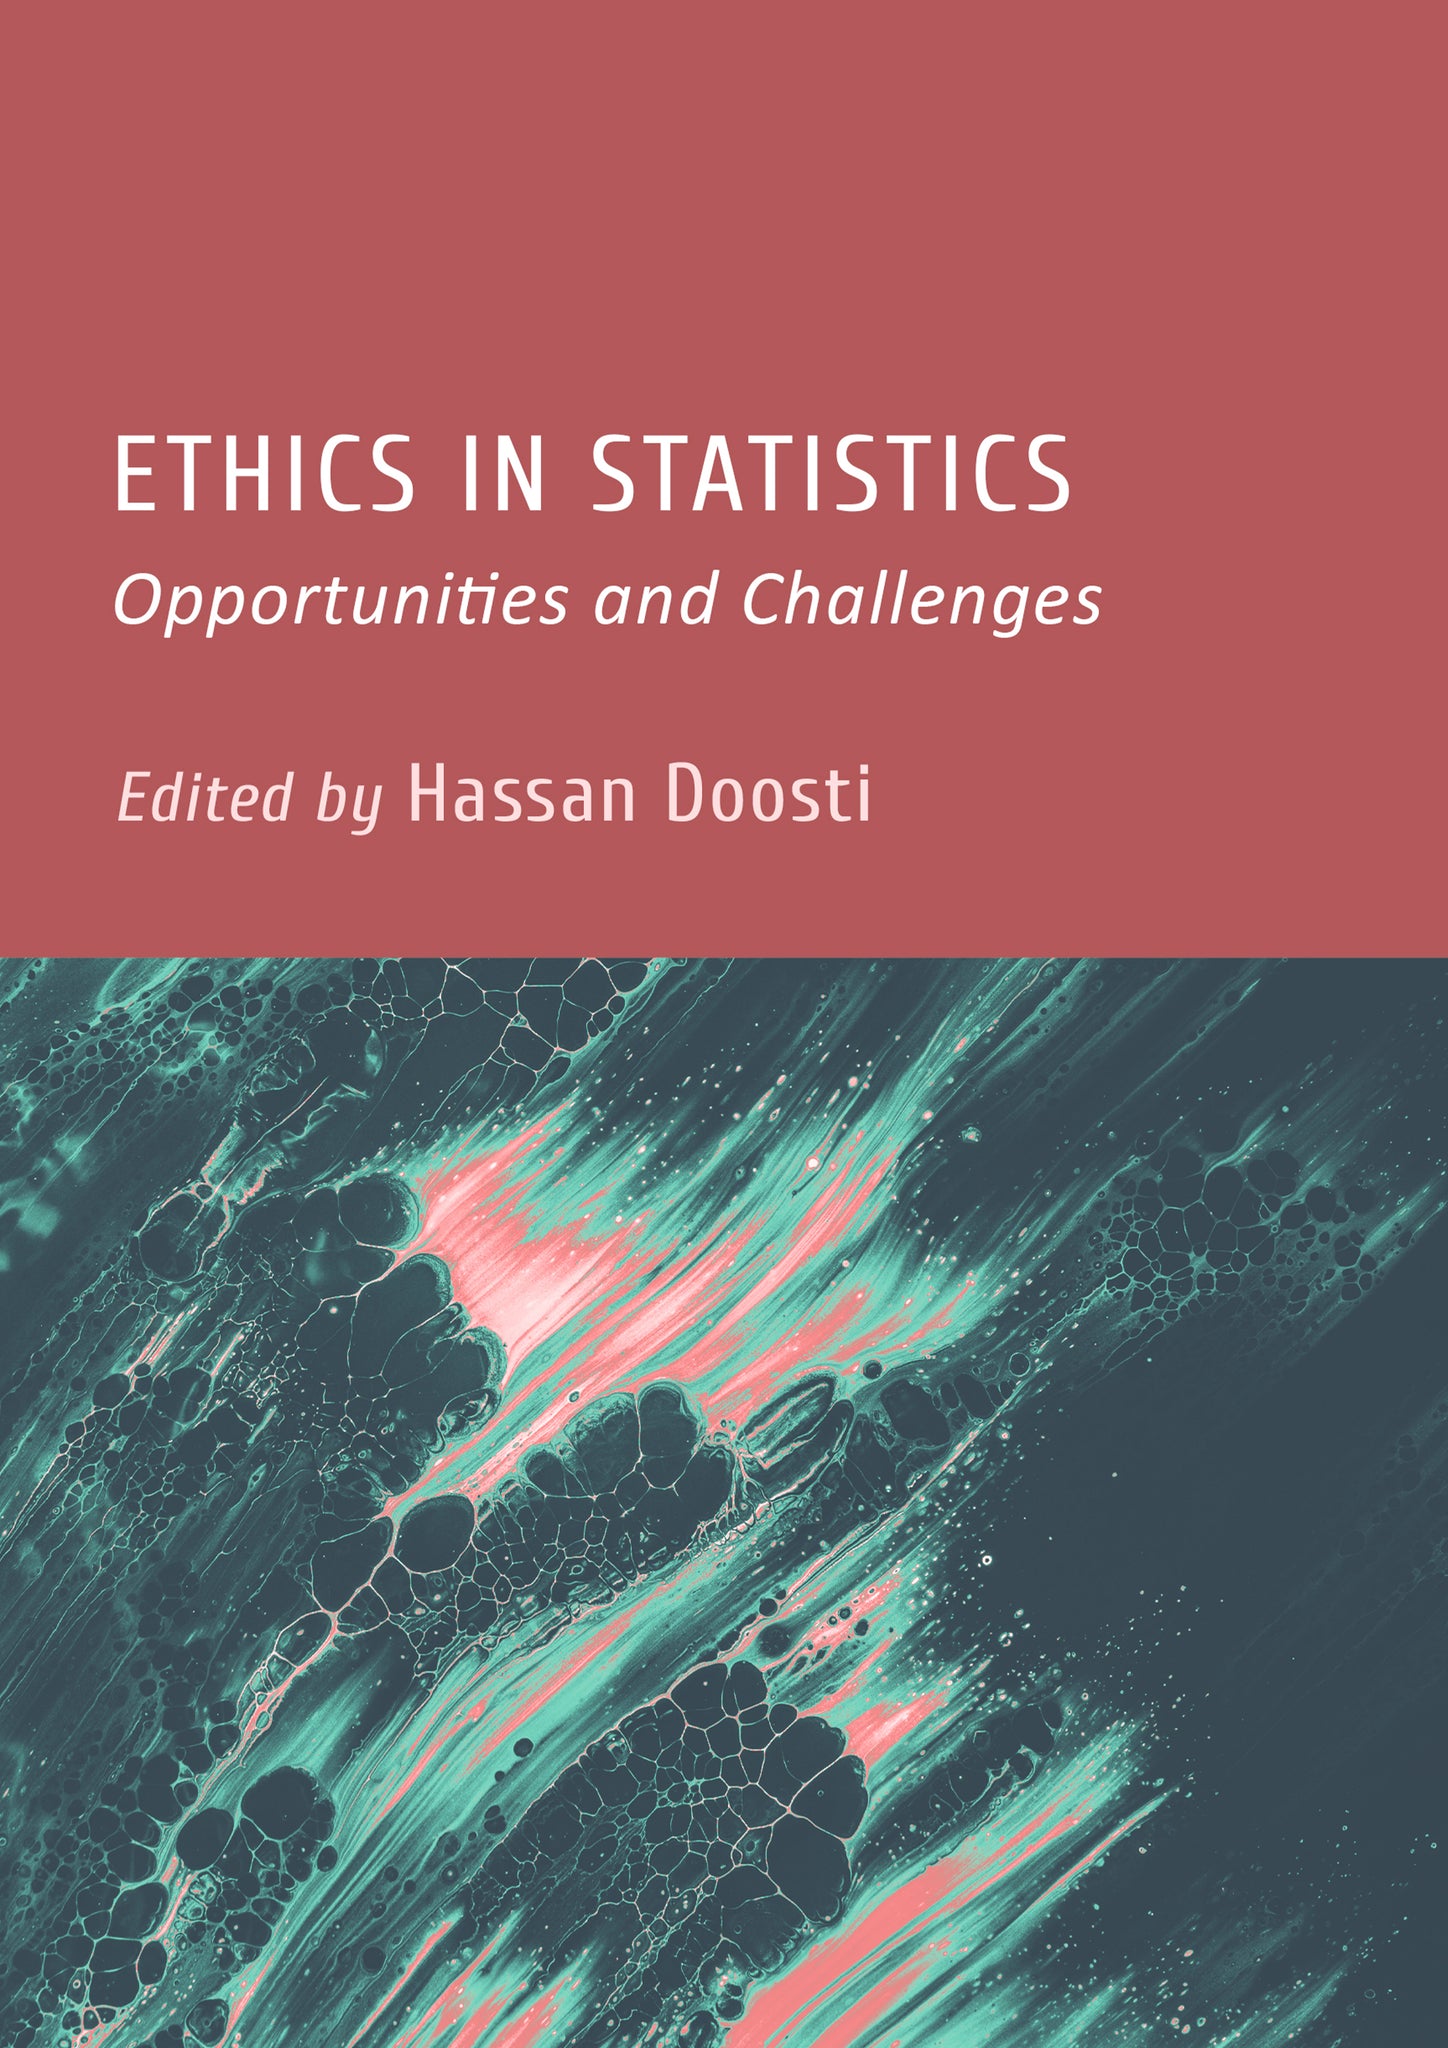 Ethics in Statistics: Opportunities and Challenges